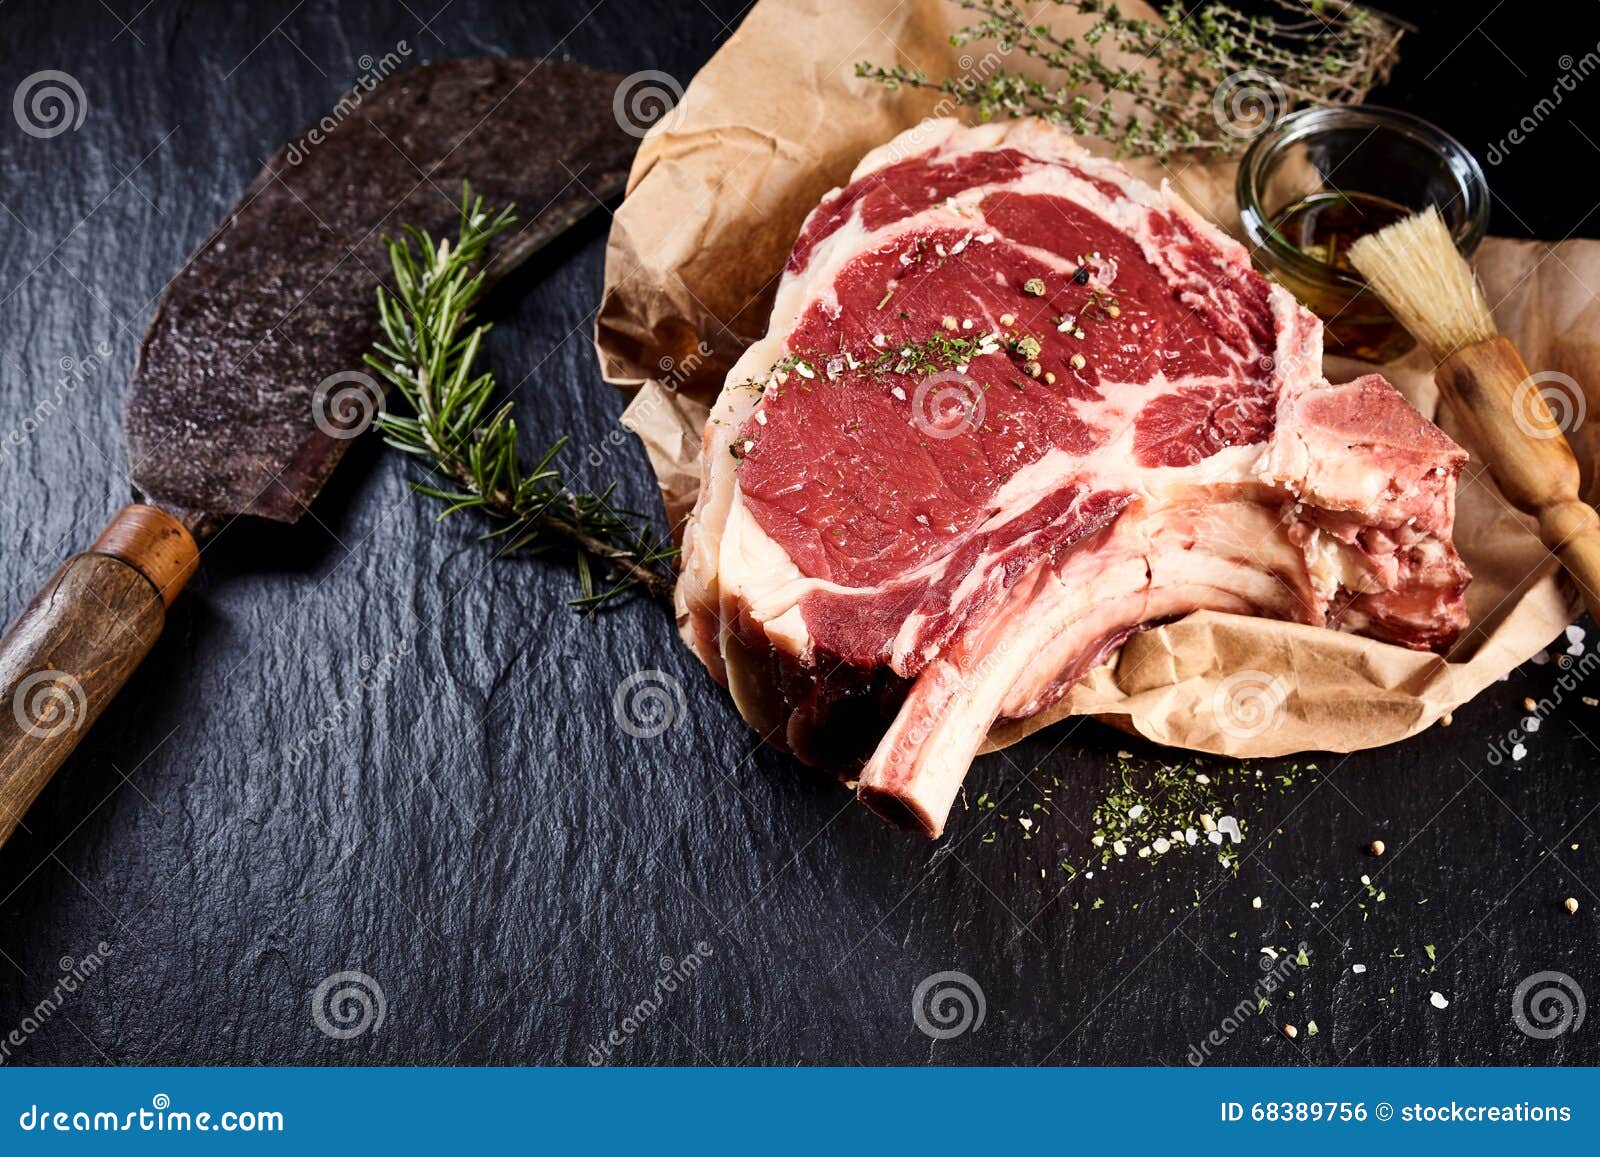 Beef Cote De Boeuf Ribs Slice and Butcher Knife Stock Photo - Image of ...